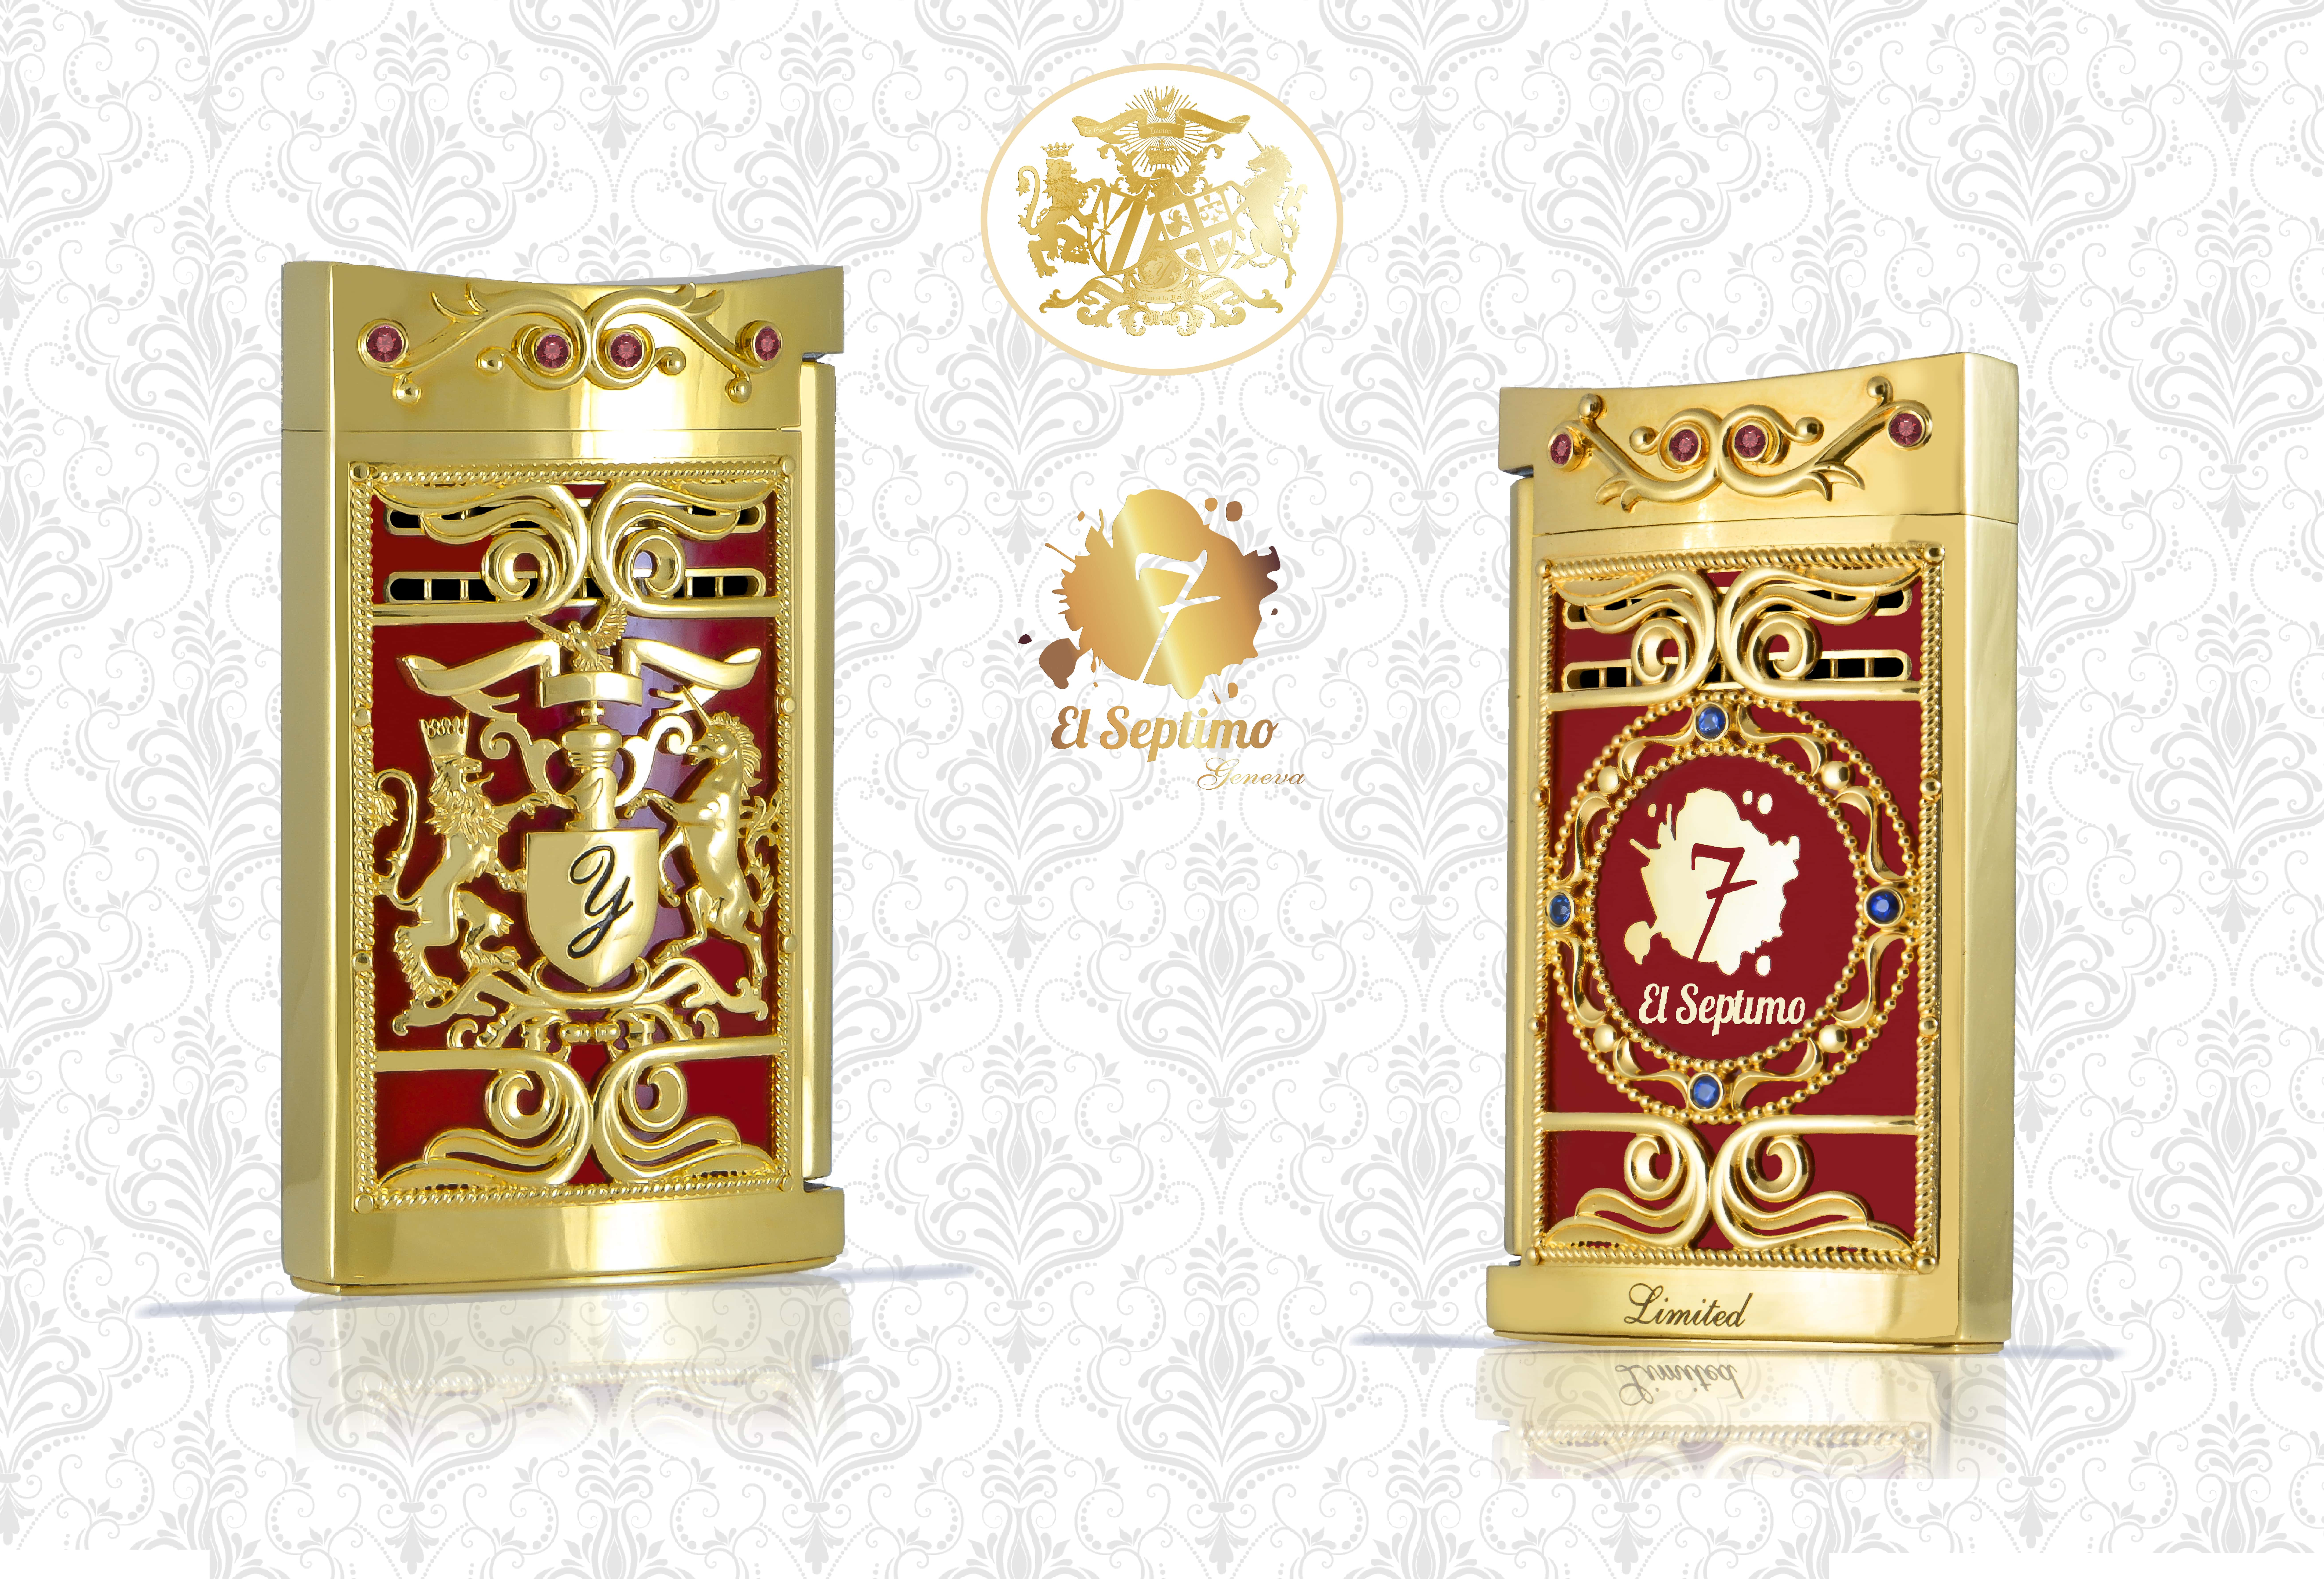 The Presidential Collection Lighters come in three different precious stones, which include Sapphire, Emerald and Ruby.